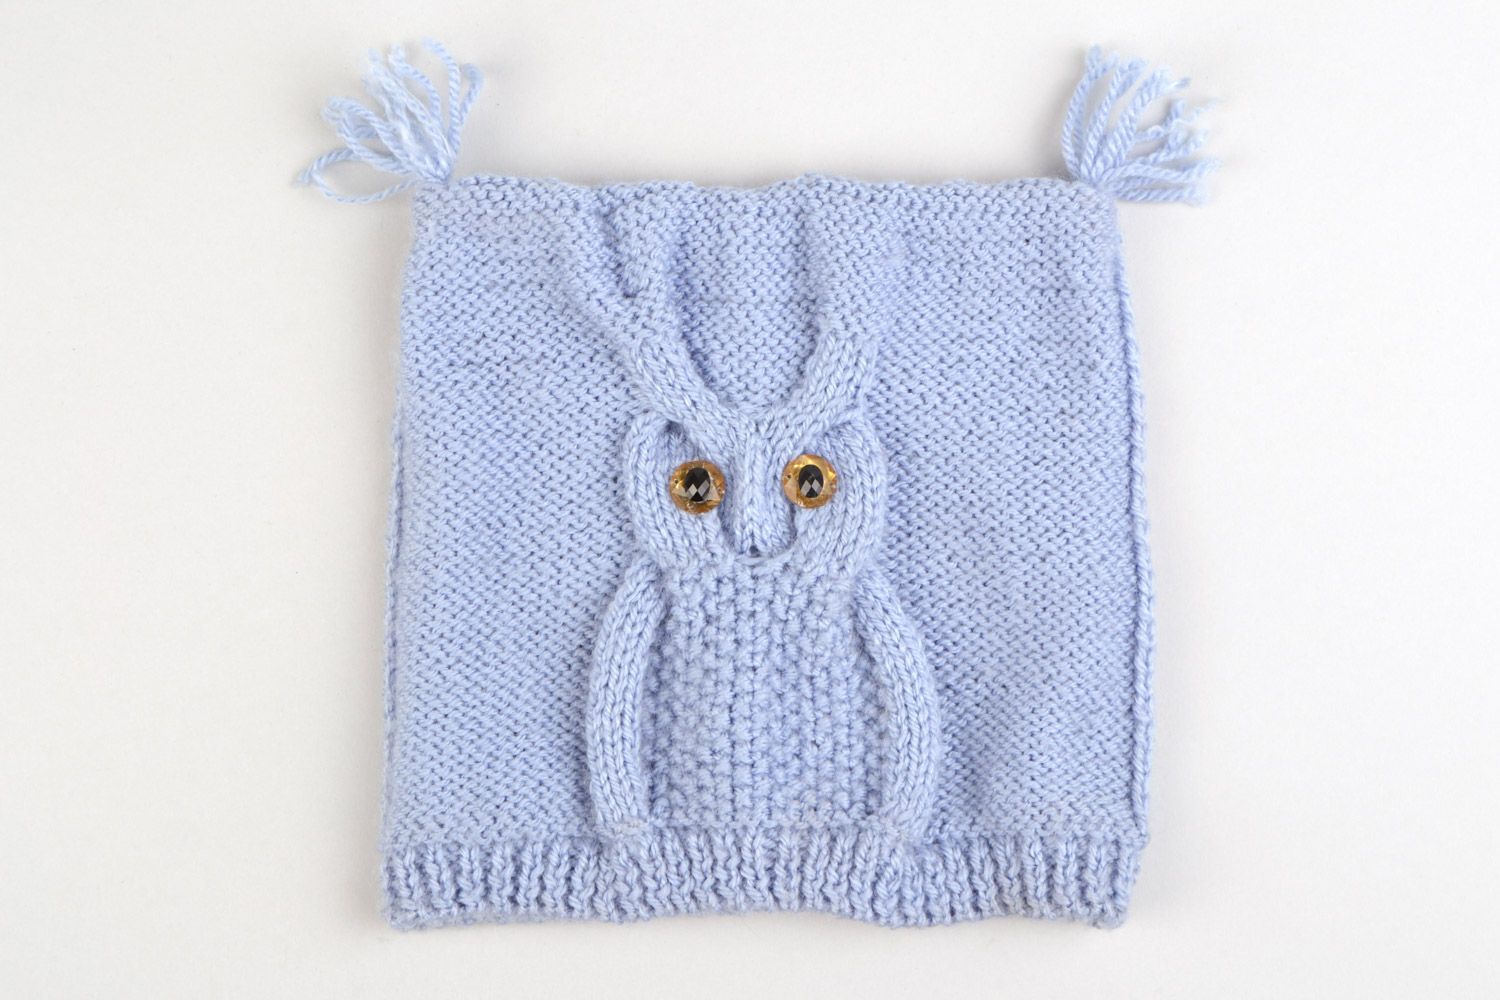 Rectangular handmade blue knitted hat for baby with owl pattern made of acrylic yarns photo 3